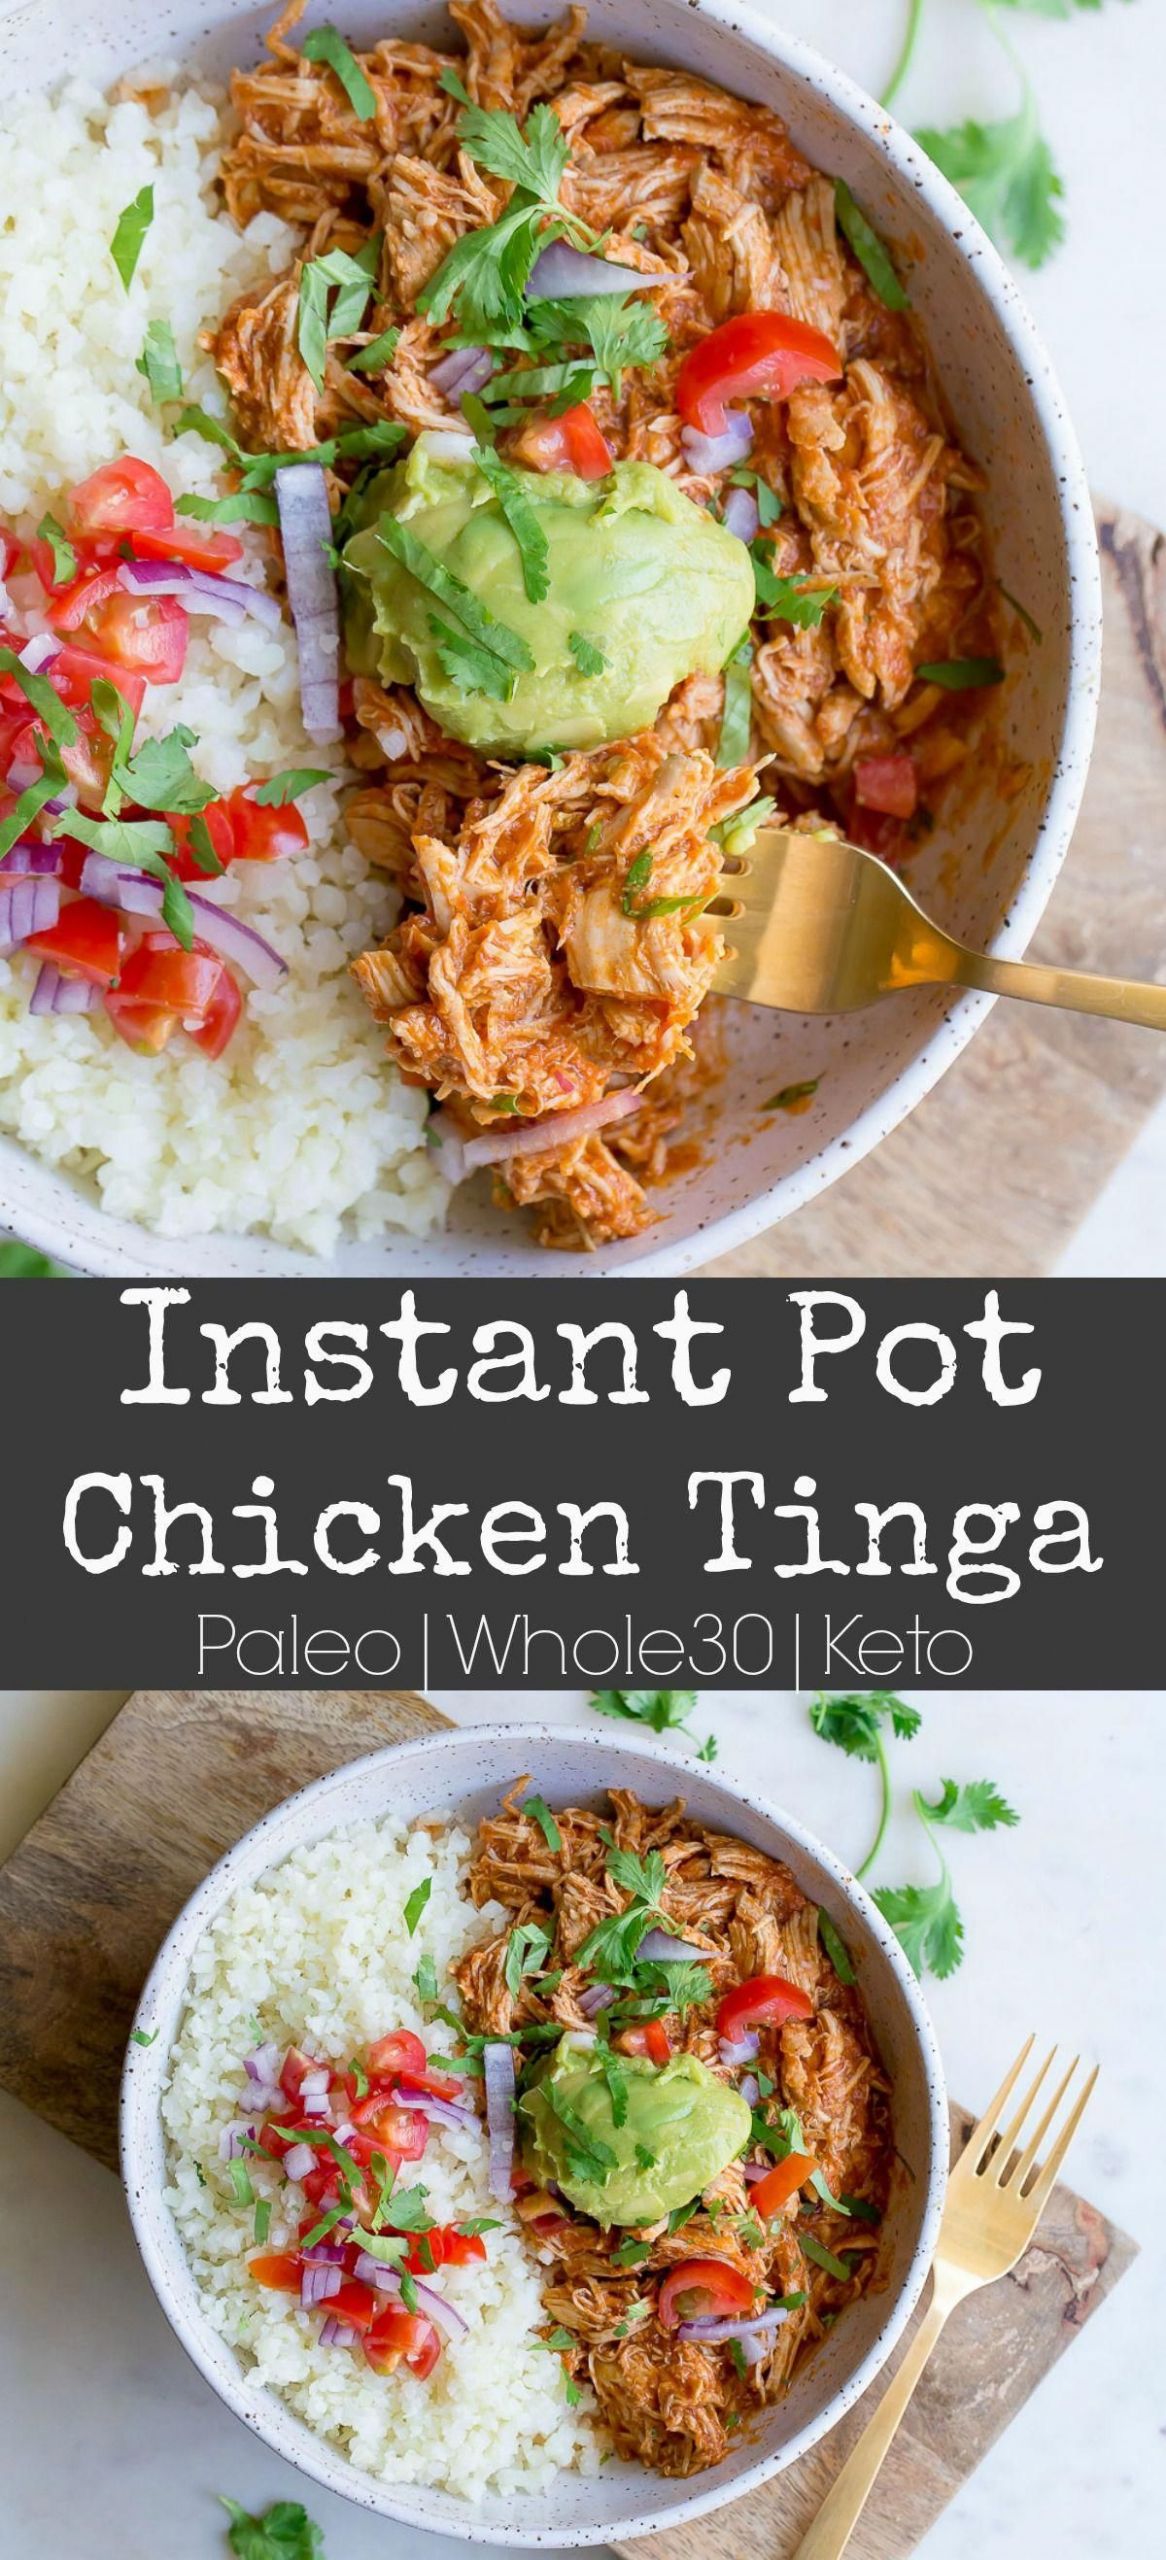 Best Paleo Instant Pot Recipes
 Instant Pot Chicken Tinga Wholesomelicious